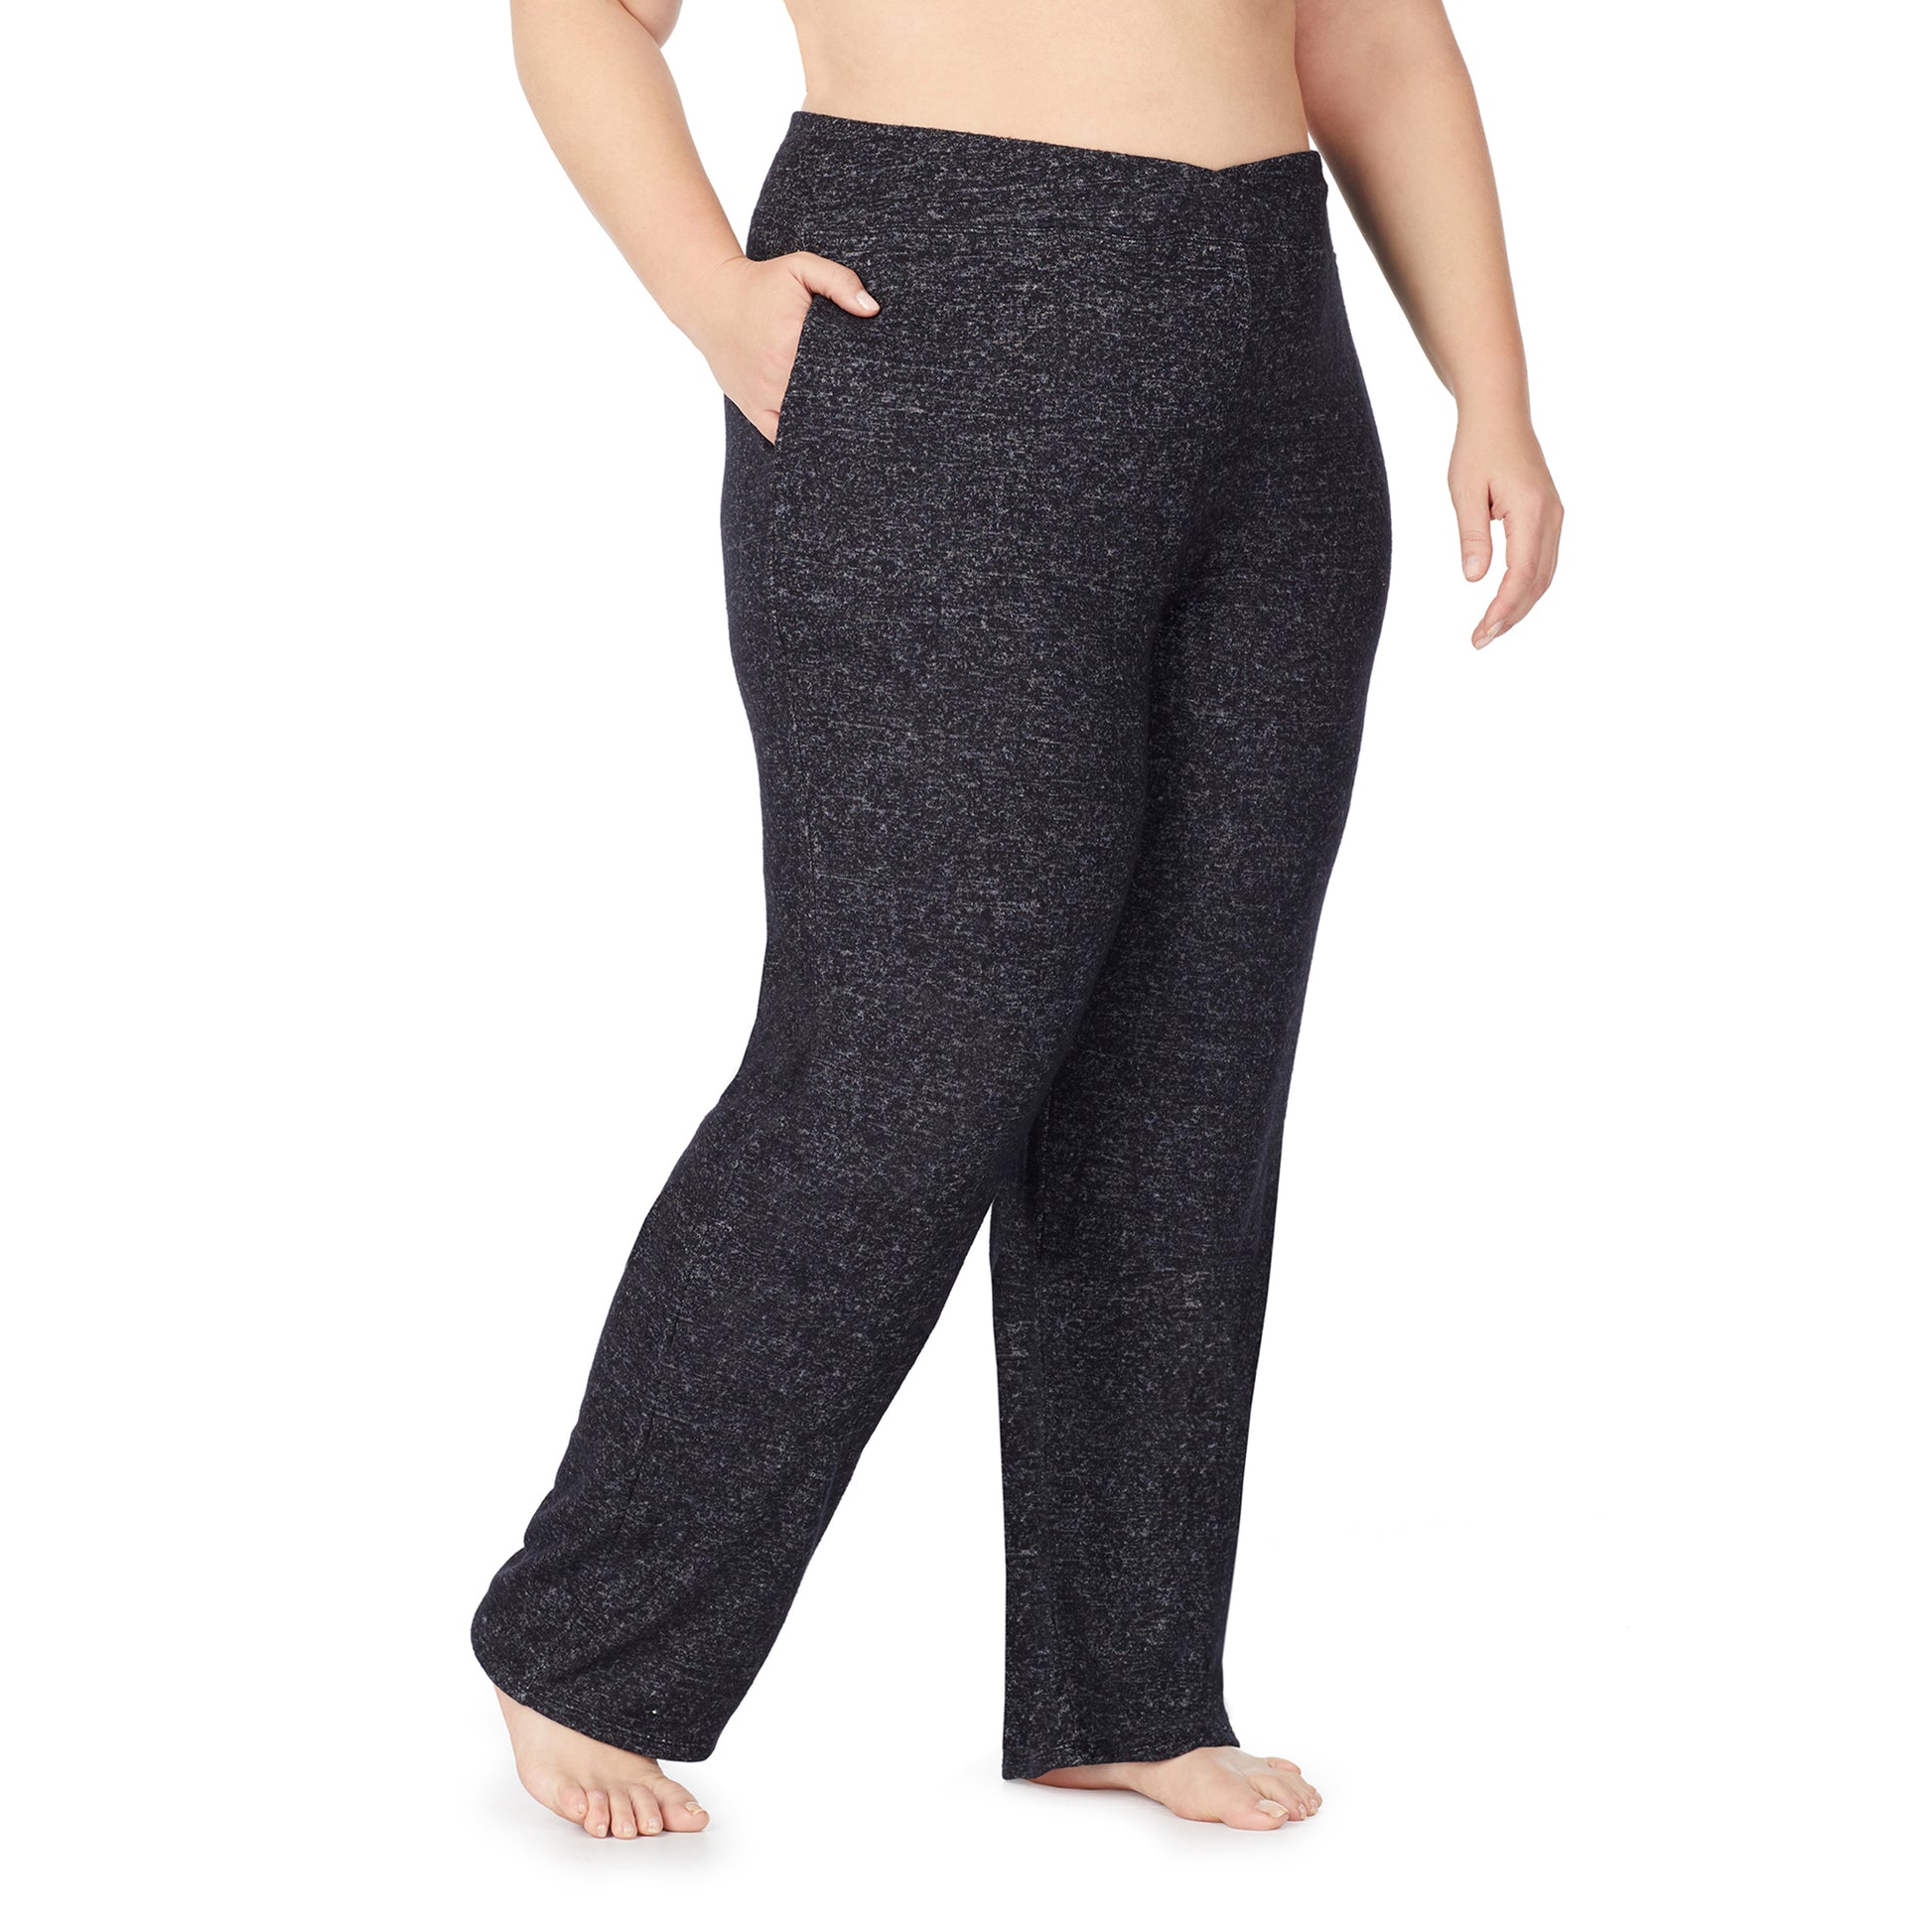 Marled Dark Charcoal; Model is wearing size 1X. She is 5'9", Bust 38", Waist 36", Hips 48.5". @A lady wearing a marled dark charcoal lounge pant plus.